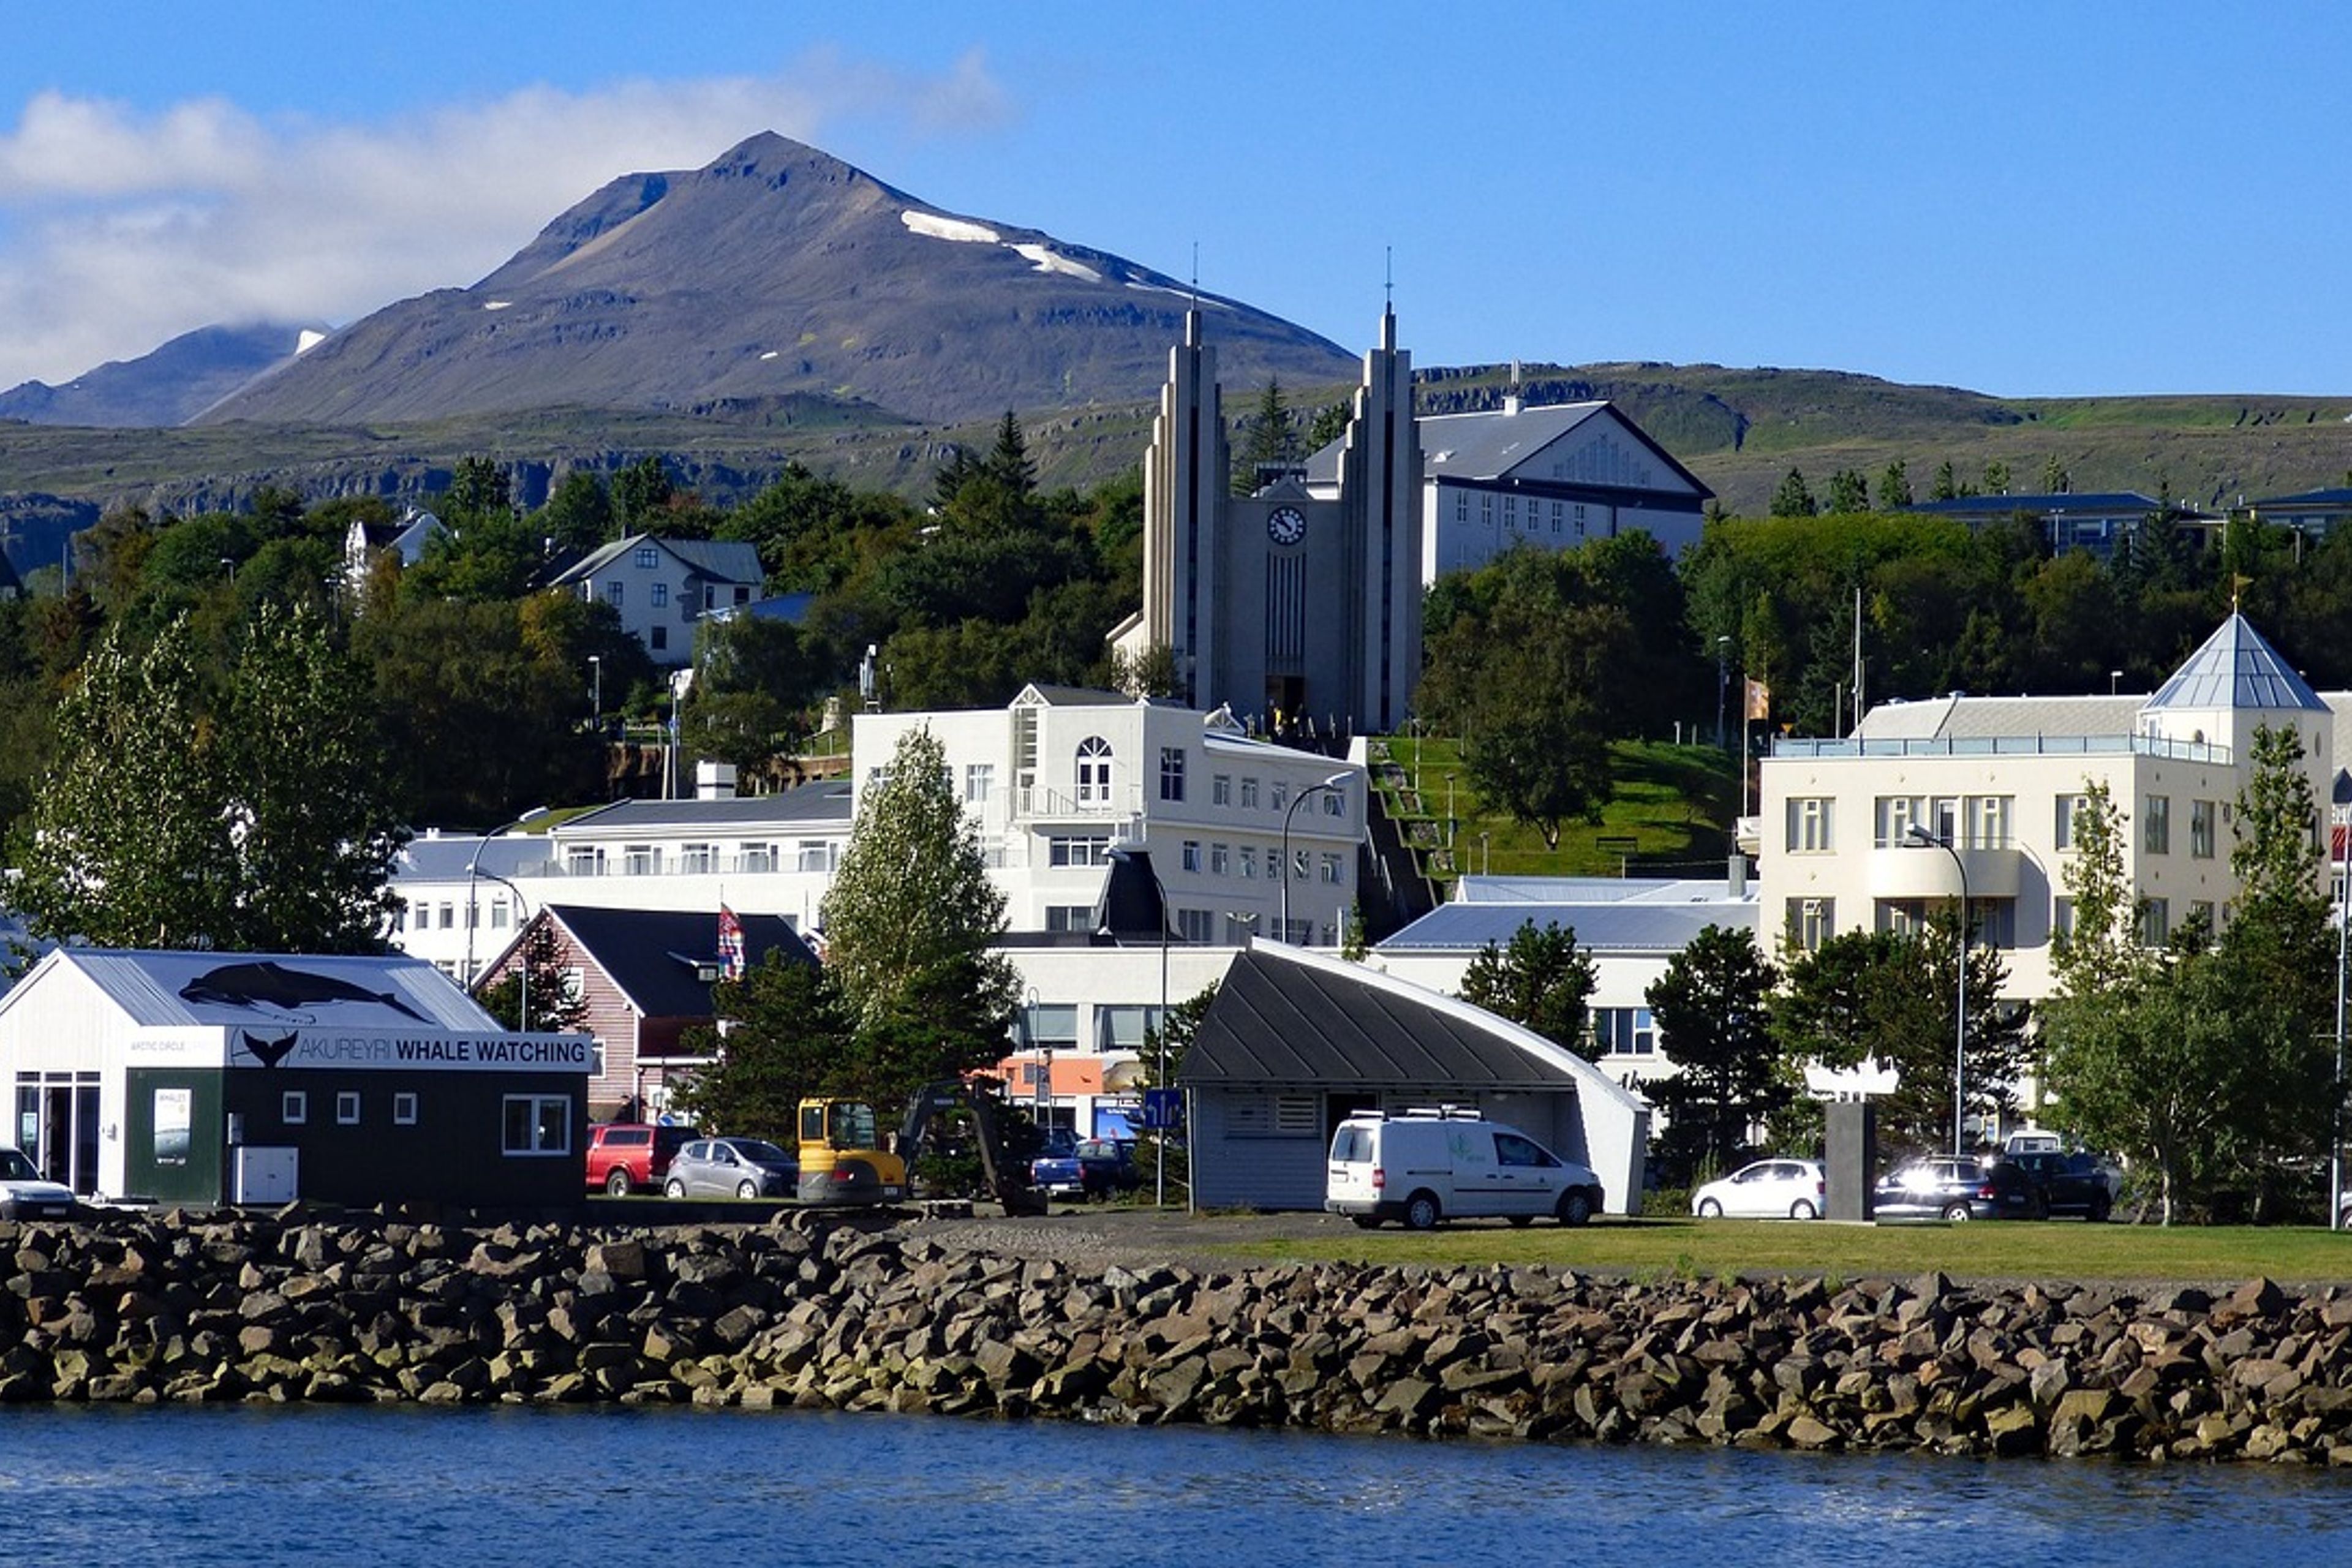 A panoramic view of Akureyri, Iceland's second-largest city, nestled by the fjord with mountains in the background.